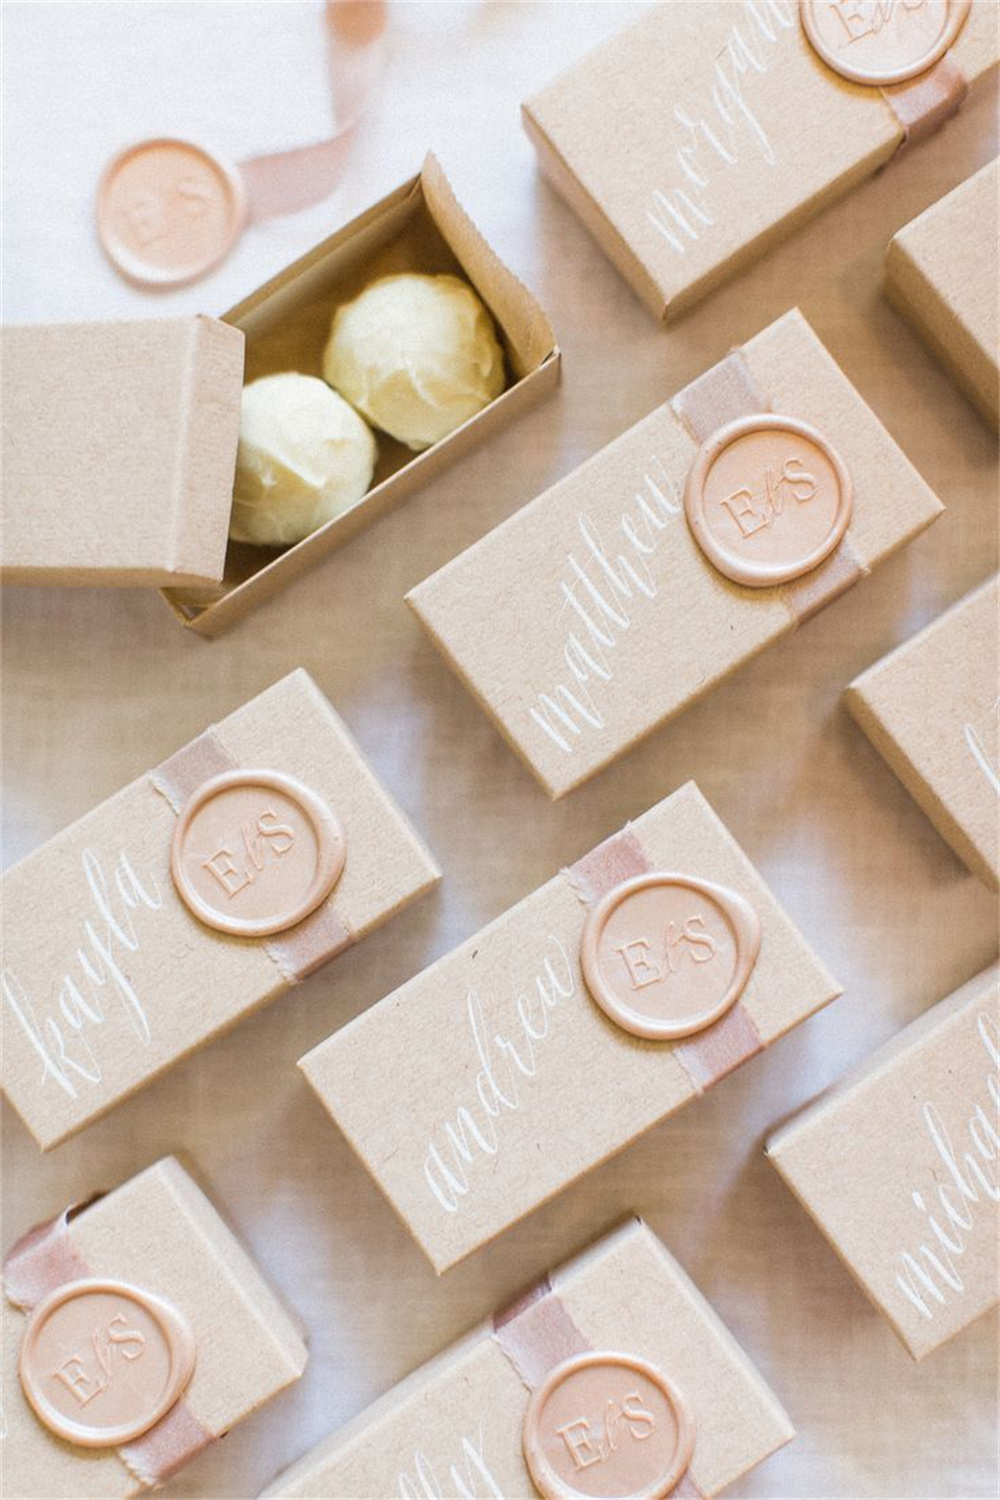 Unique Edible Wedding Favors with Chocolate